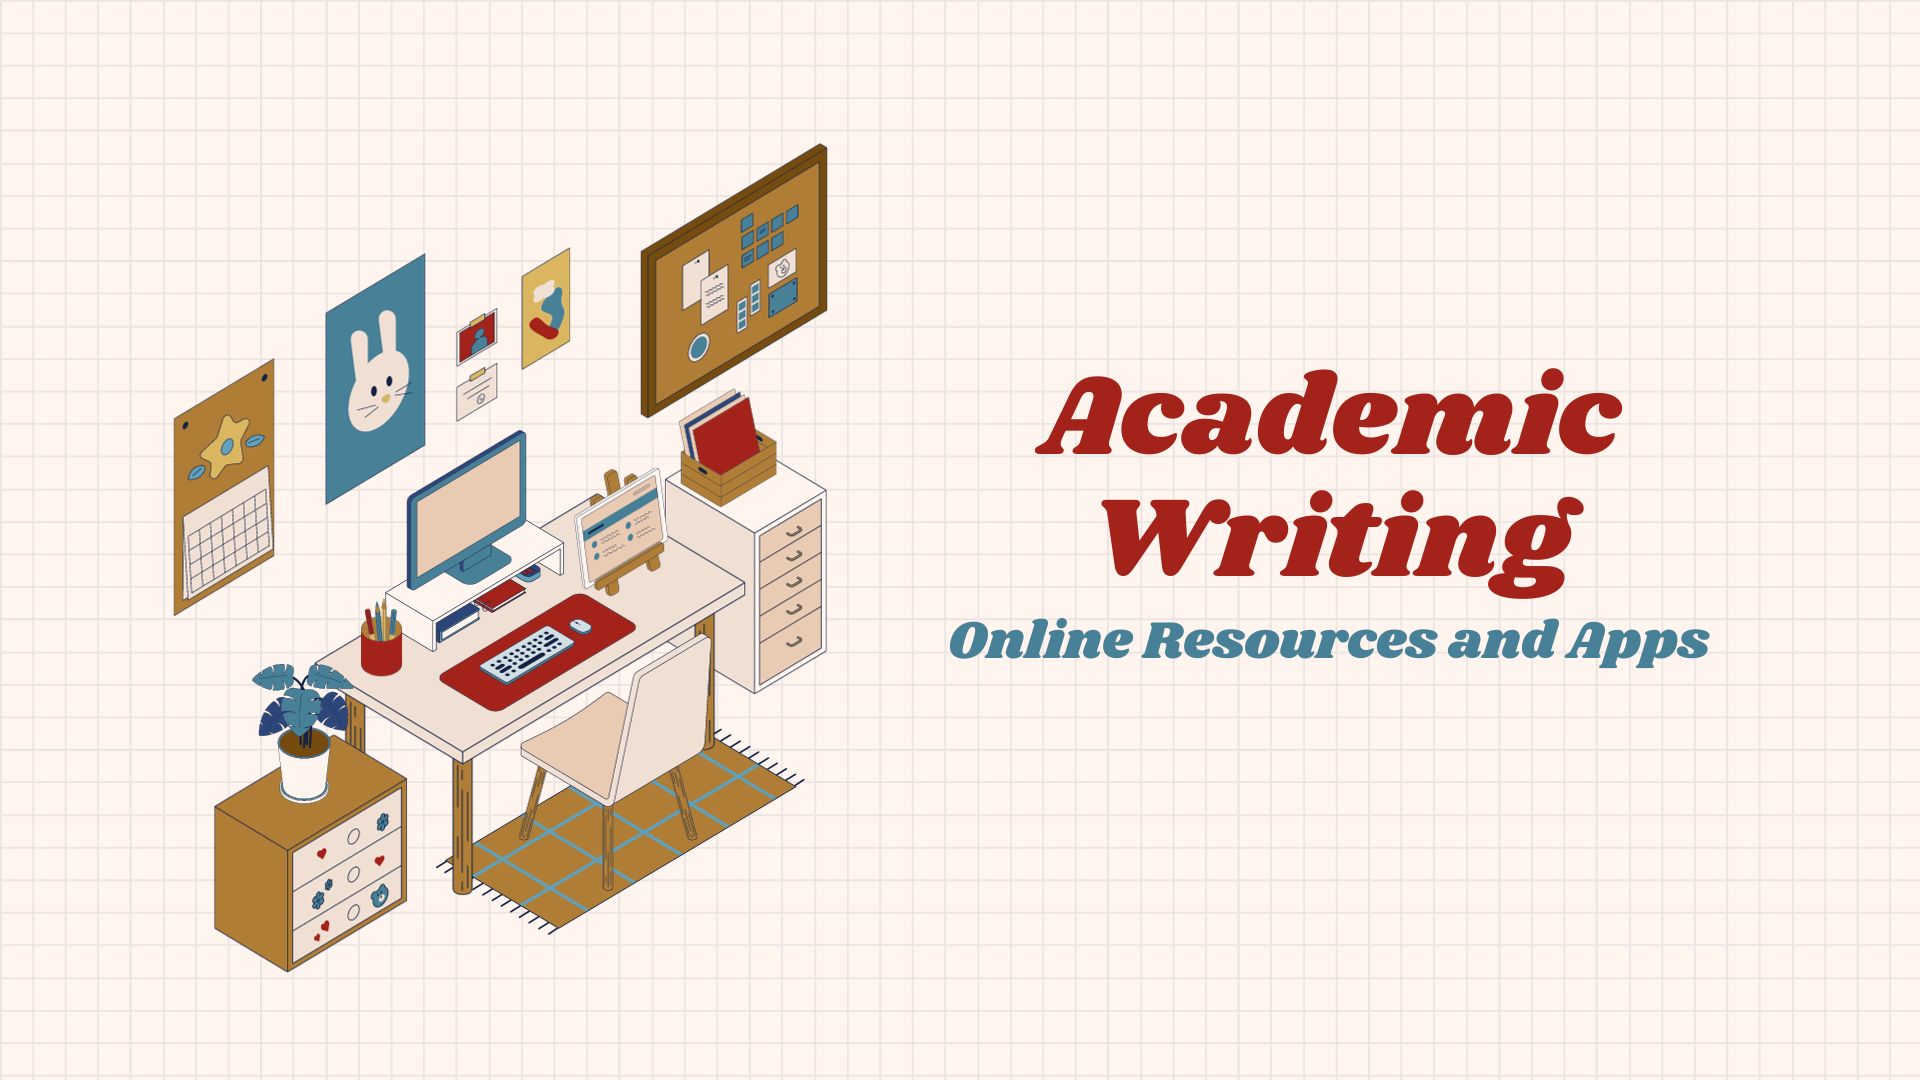 Popular Online Resources and Apps for Academic Writing